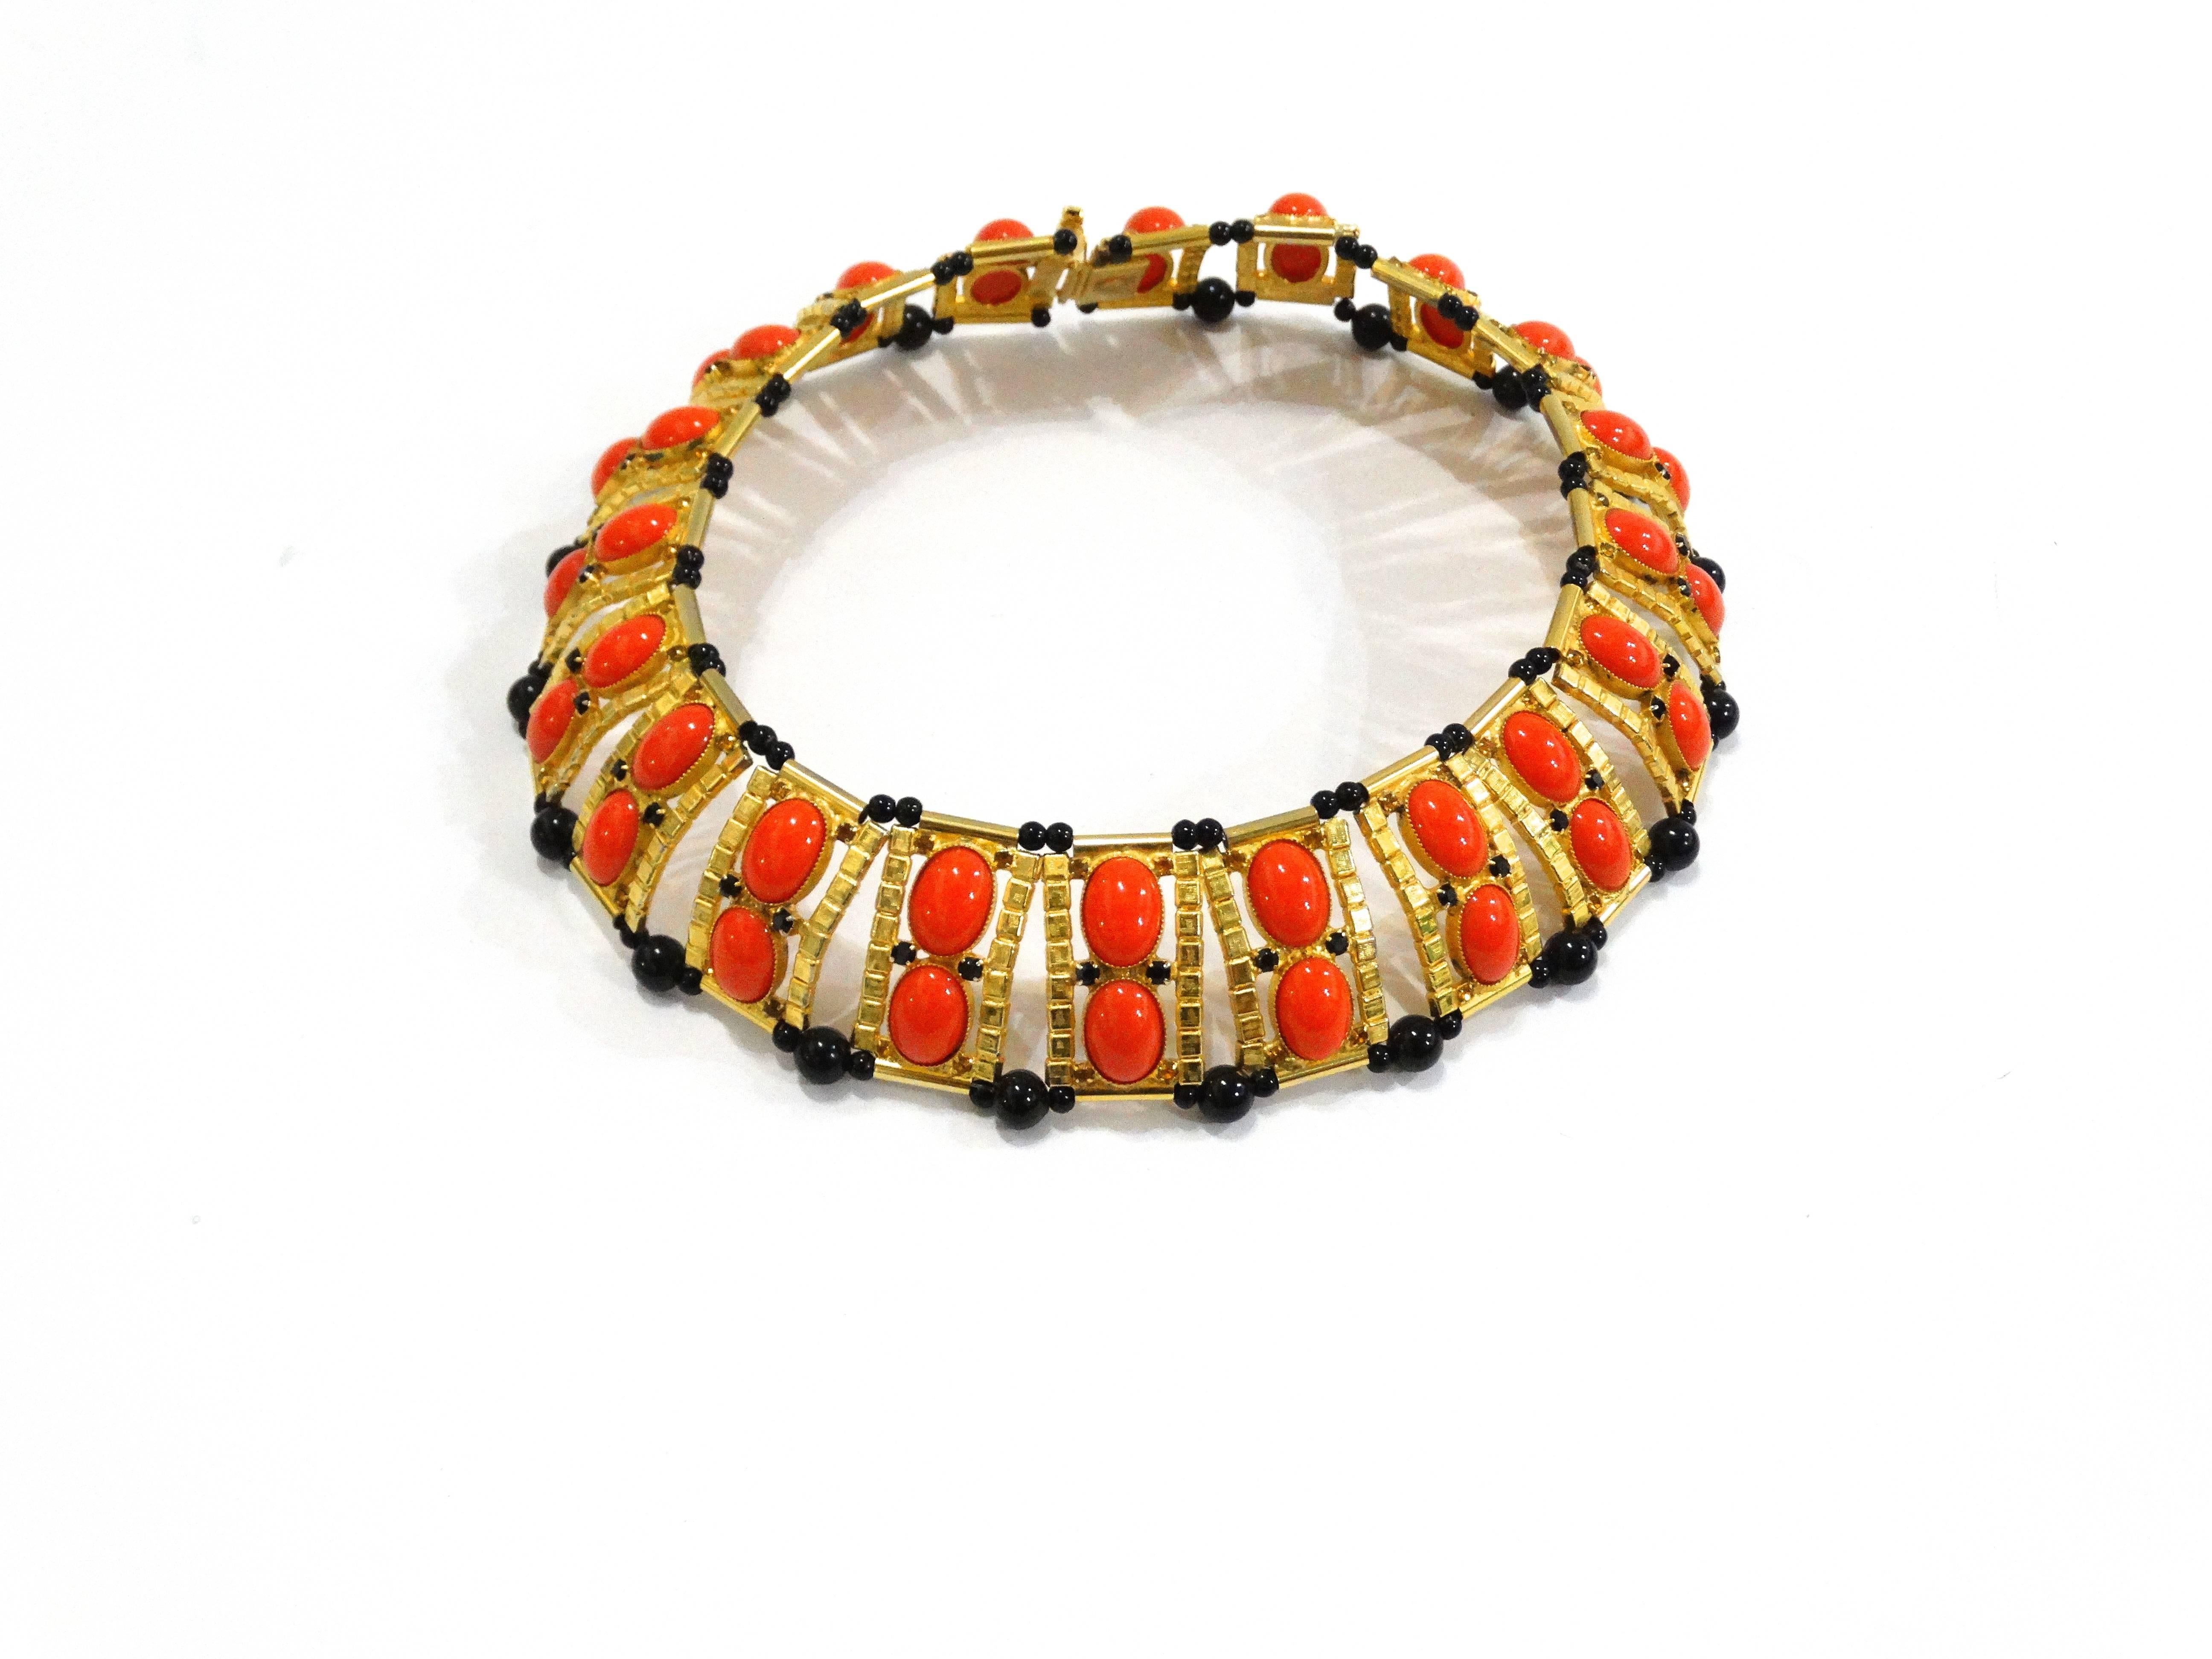 A true master piece designed by William de Lillo for Bishop Monseigneur Joseph Sembel in 1974. This beautiful Egyptian Revival collar necklace is designed with coral cabochons and black onyx beads. Gold plated hardware. This beautiful piece was